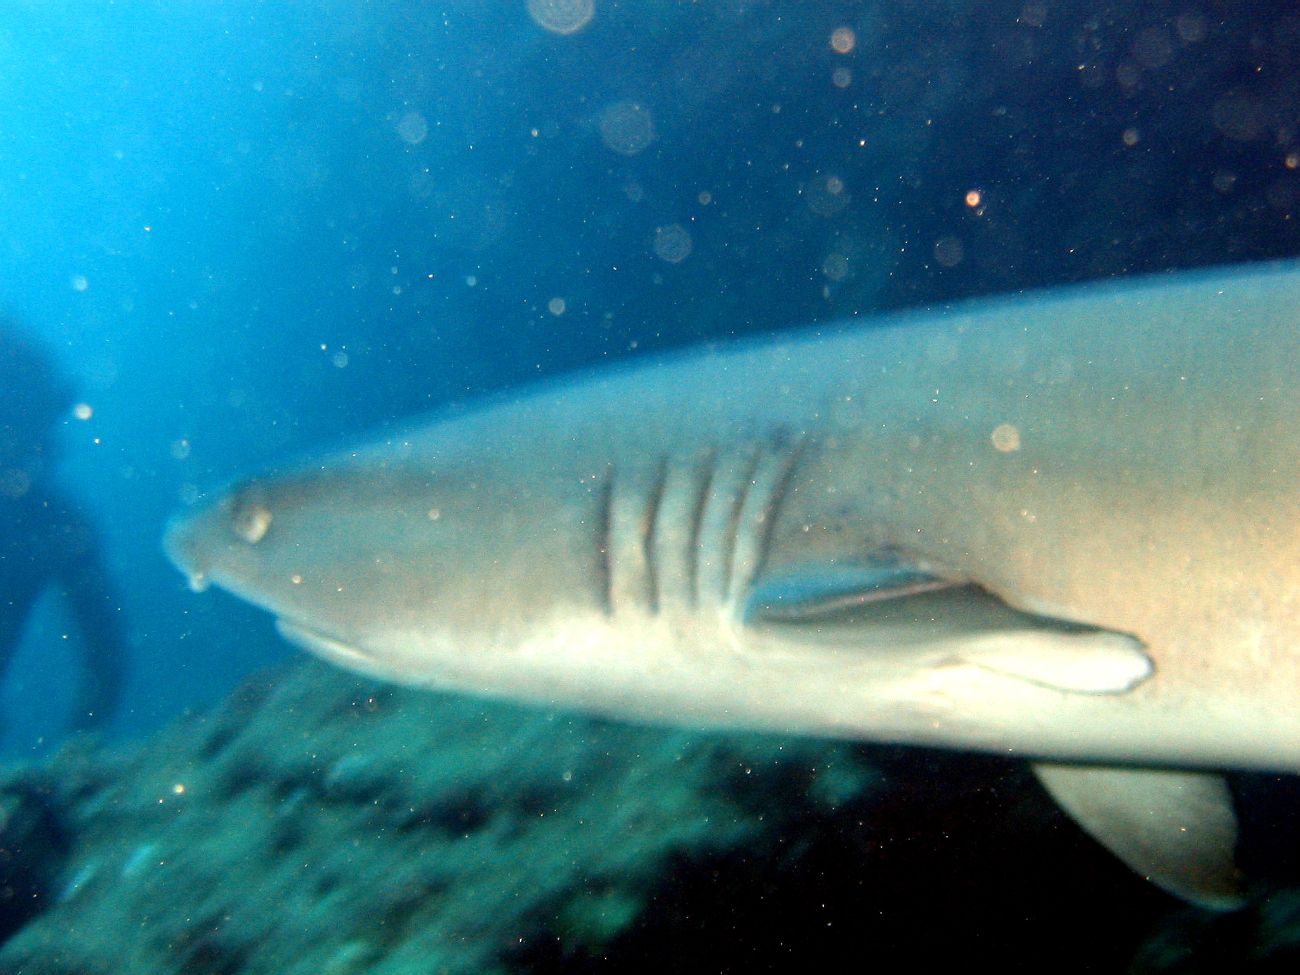 A white-tip shark (Triaenodon obesus) up close and personal